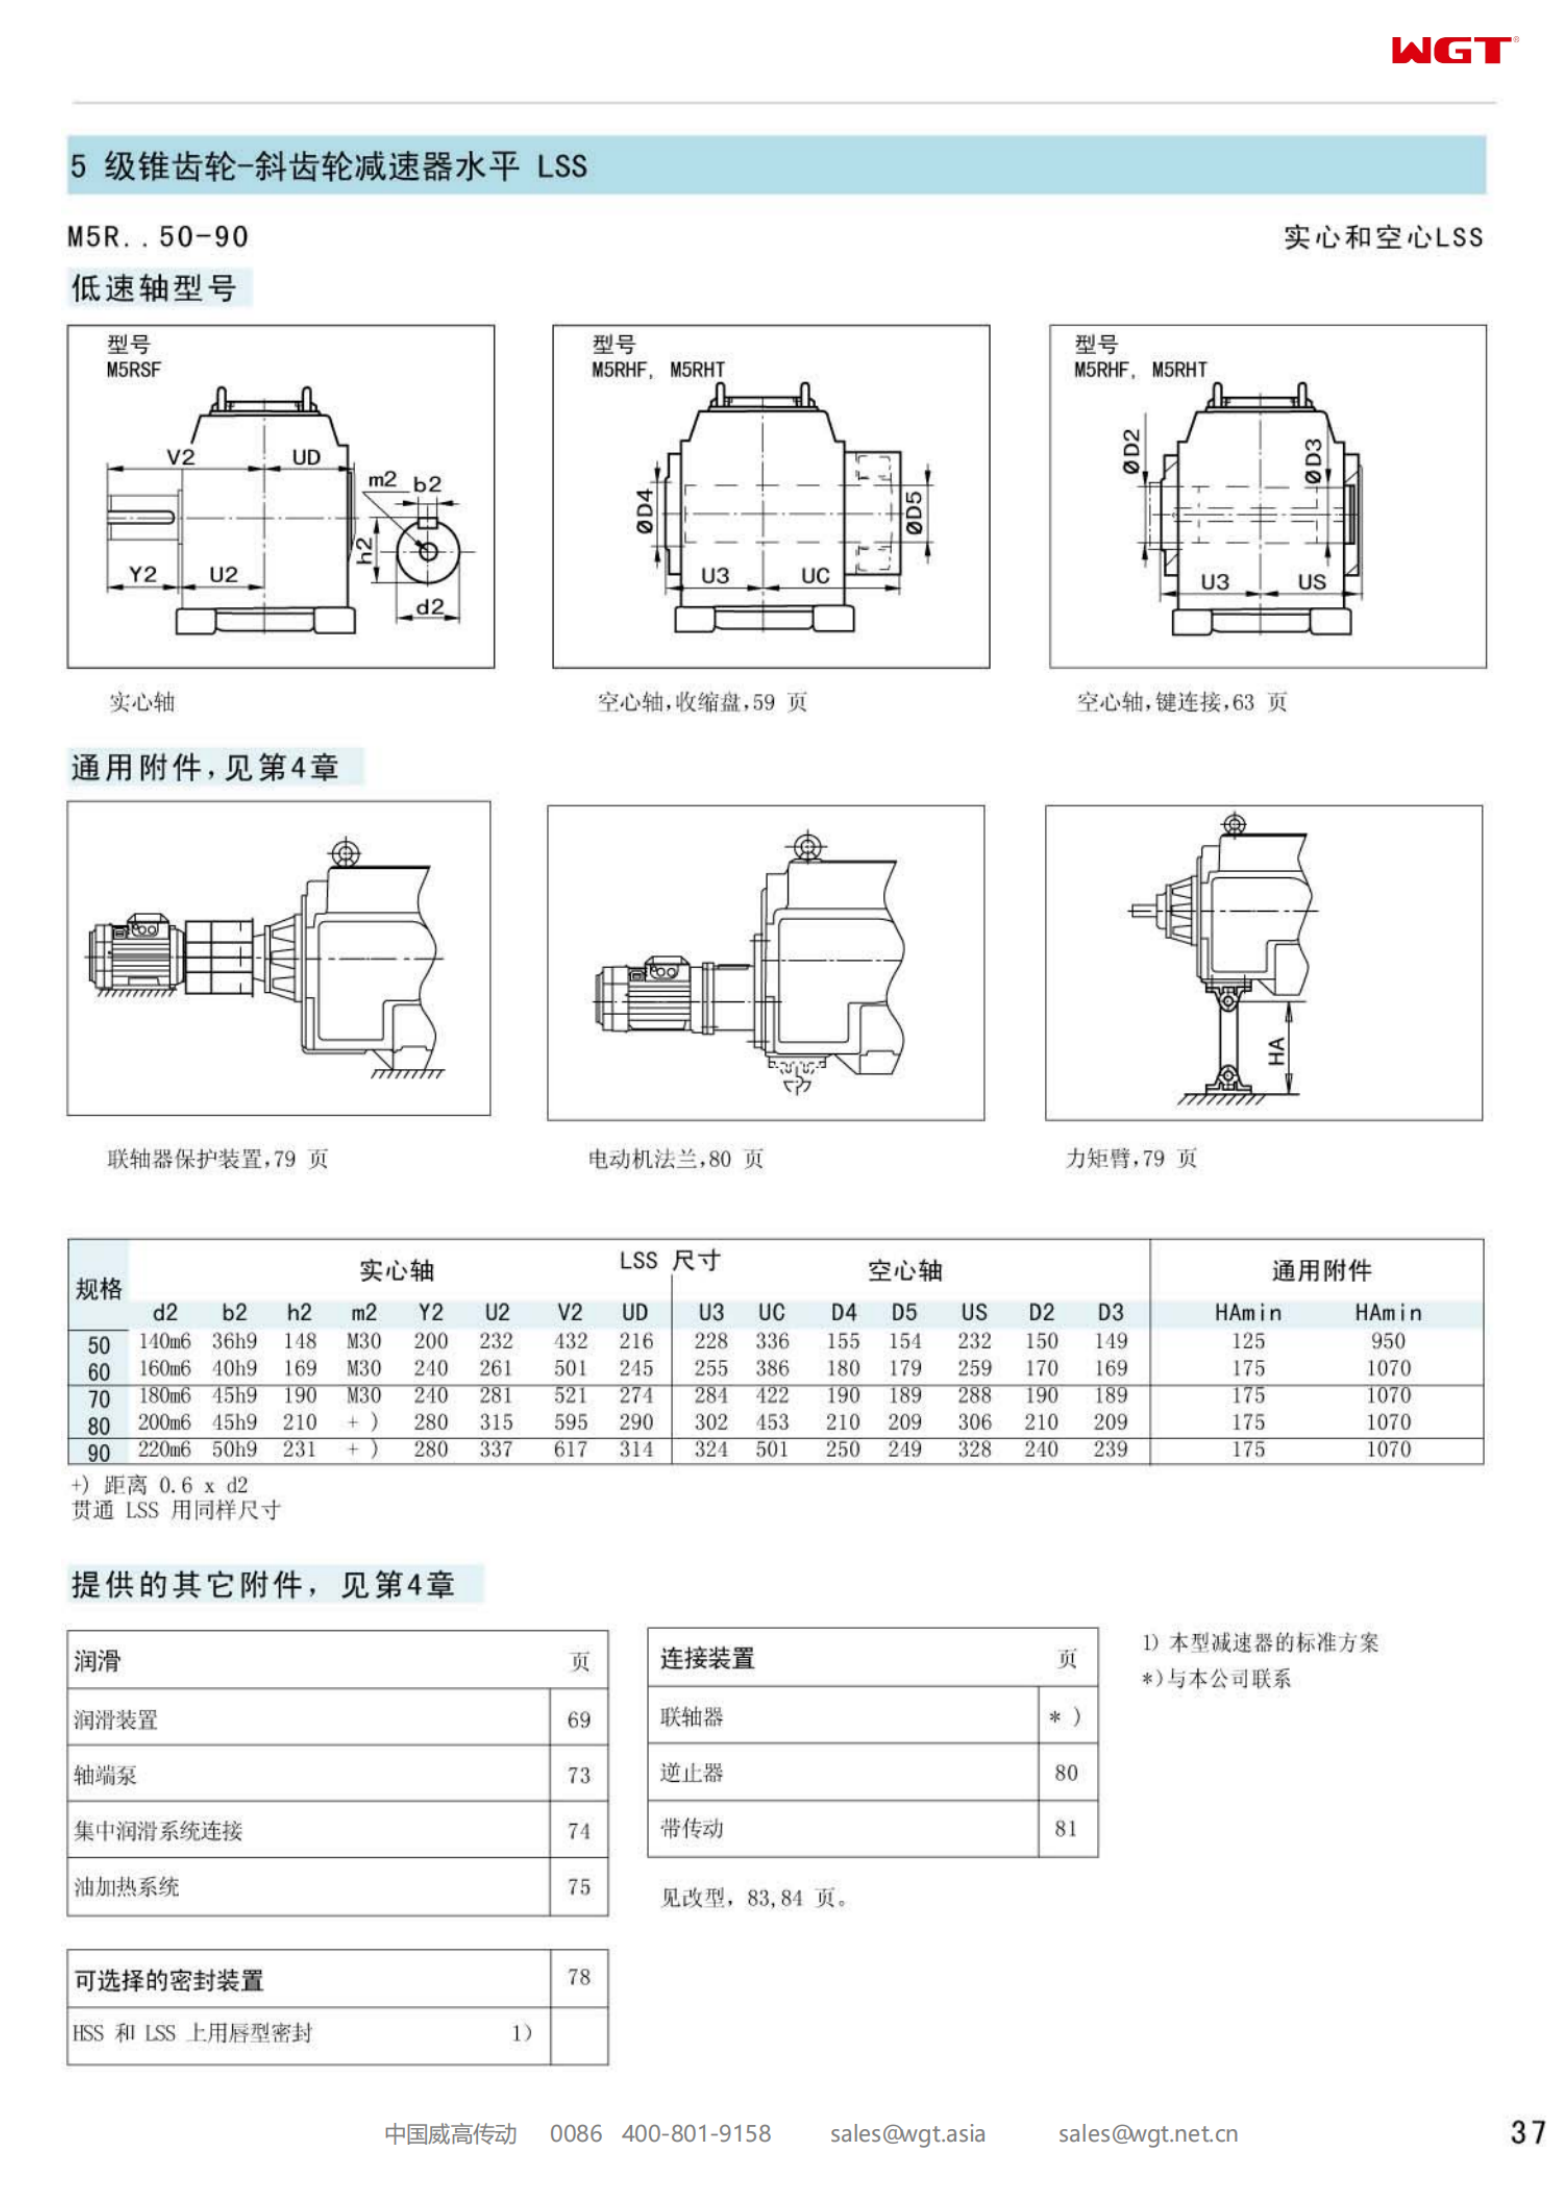 M5RSF90 Replace_SEW_M_Series 变速箱